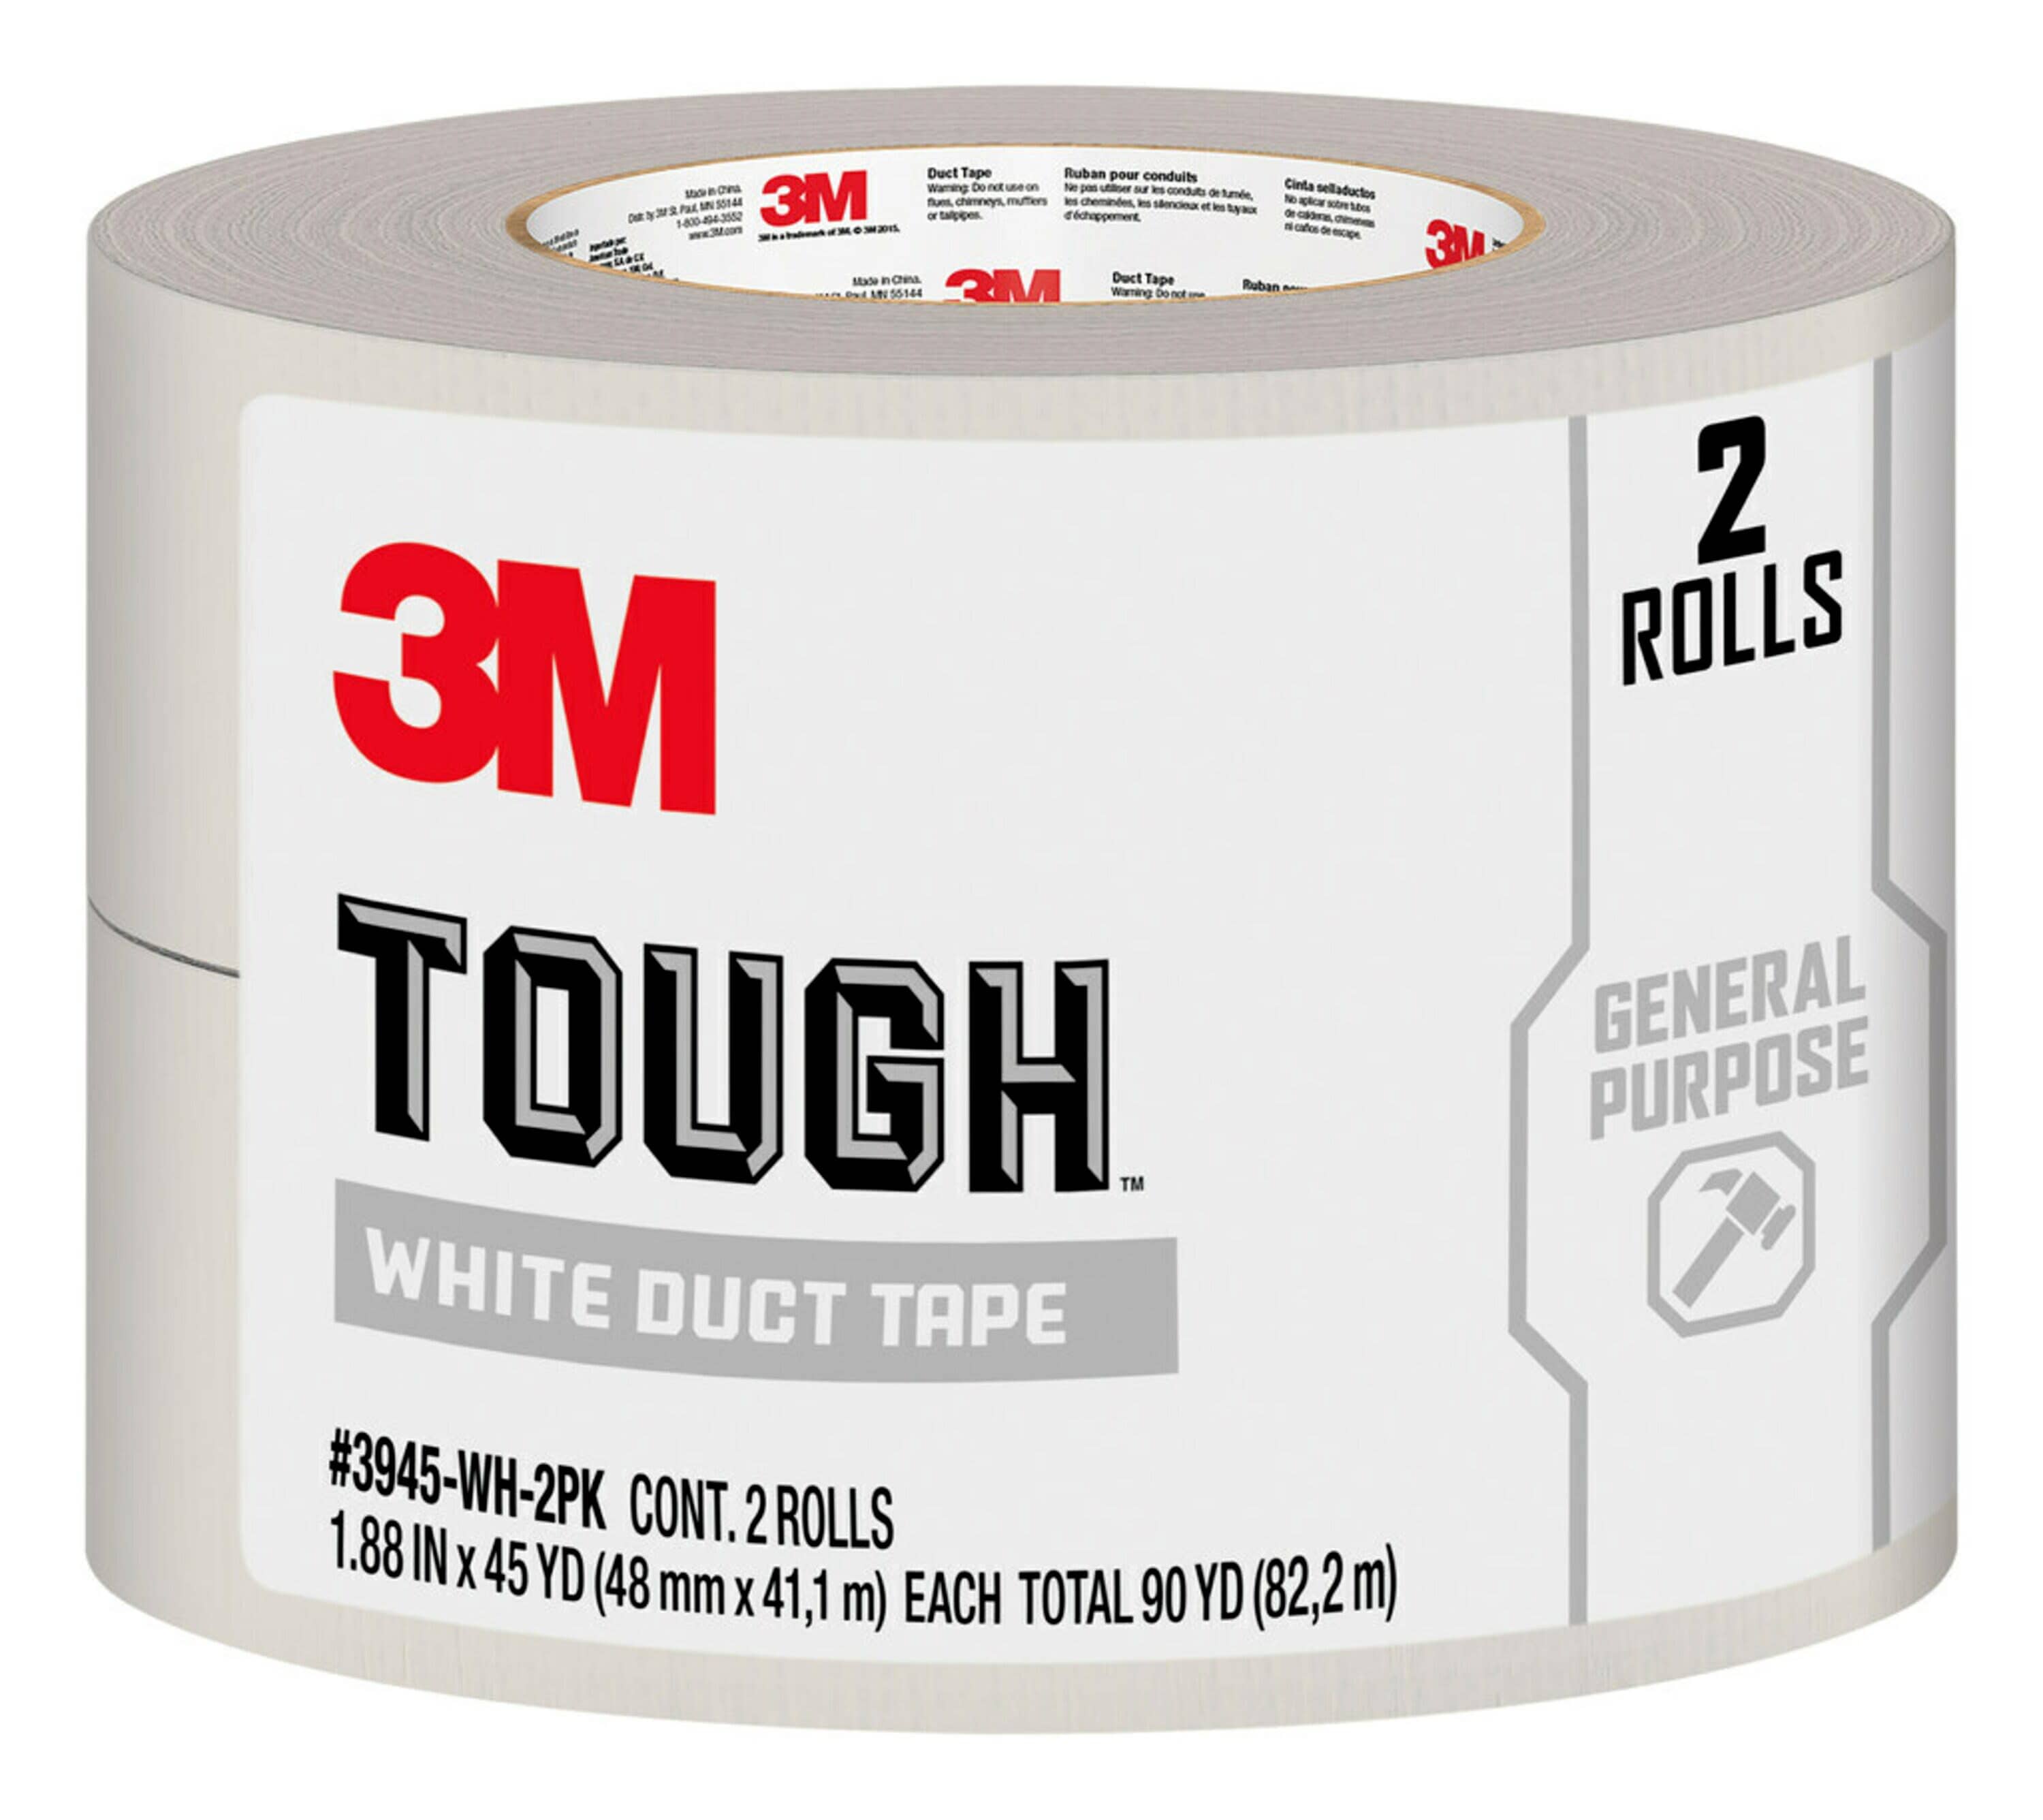 3M 7100085114 White Duct Tape 3920-WH, 1.88 in x 20 yd (48 mm x 18, 2